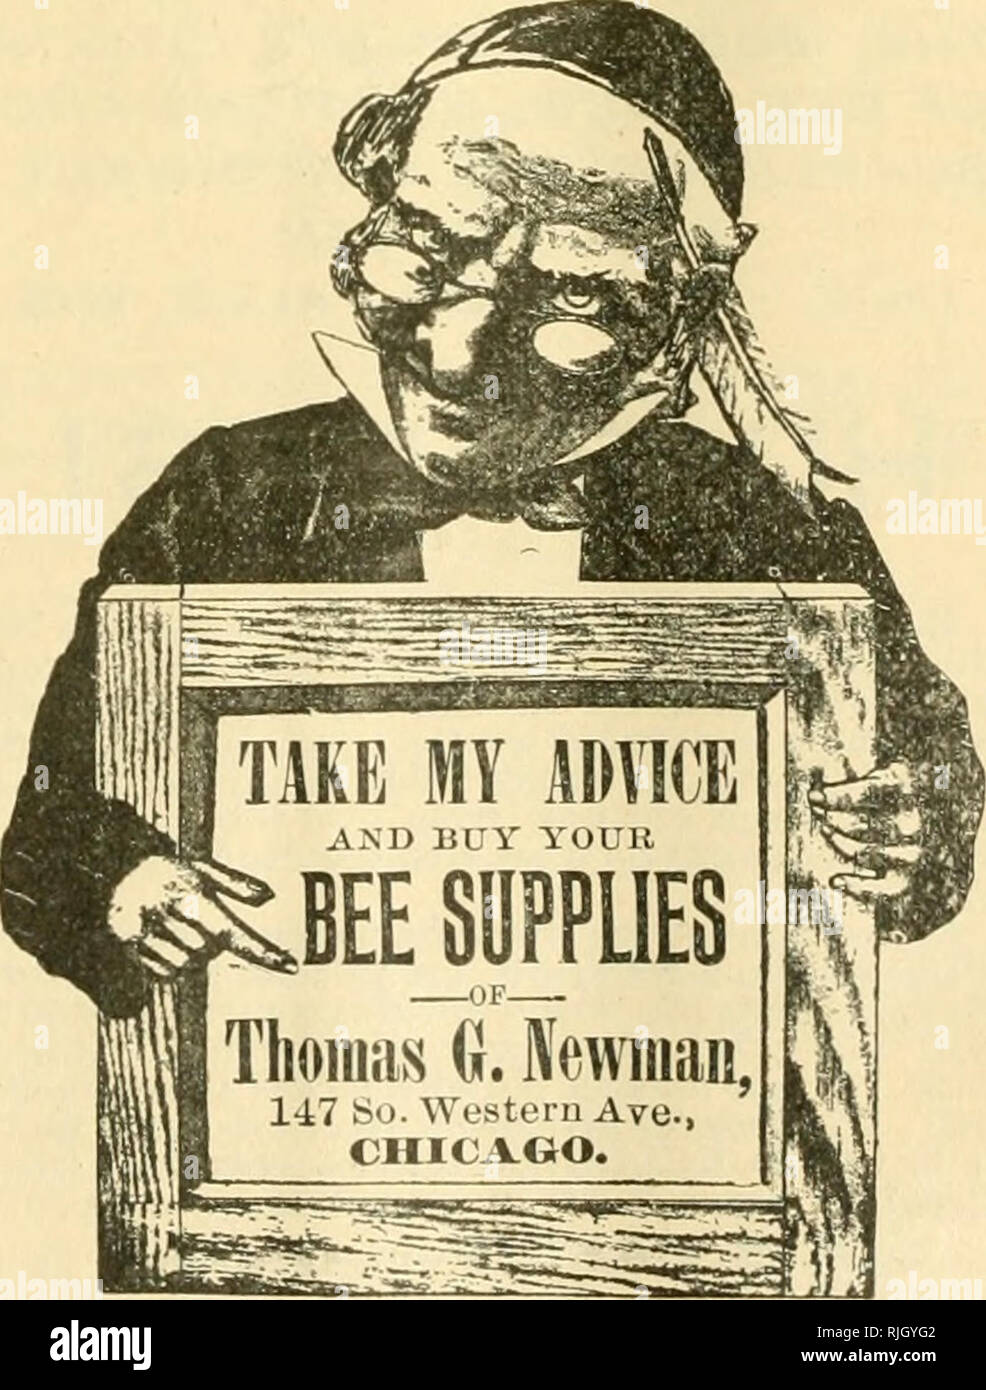 . The Bee-keepers' review. Bee culture. I'HJb BEE-KEEPERS REVIJ^W- 143 Dr. J. W. CRE/SSHAW, Versailles, Ky., Offers for Sal? QHTeiSTeiD QQEEHS At $1.00 each ; after July 1st., 75 cts. Only the yellowest ( &quot; 5-banded &quot; ) variety, and as good queens as anybody can rear. Bred from ouly the best mothers possible to obtain. Imported siock mated to yellow drones, same price. Any of Koot's goods at his prices. Send for circular. Book your orders now and get your queens and supplies when needed. Queens ready in May. 3-94-tf THE ODELL TYPE WRITER. 00(1 willbuy the ODELL TYPEWRITER iDtUand CHE Stock Photo